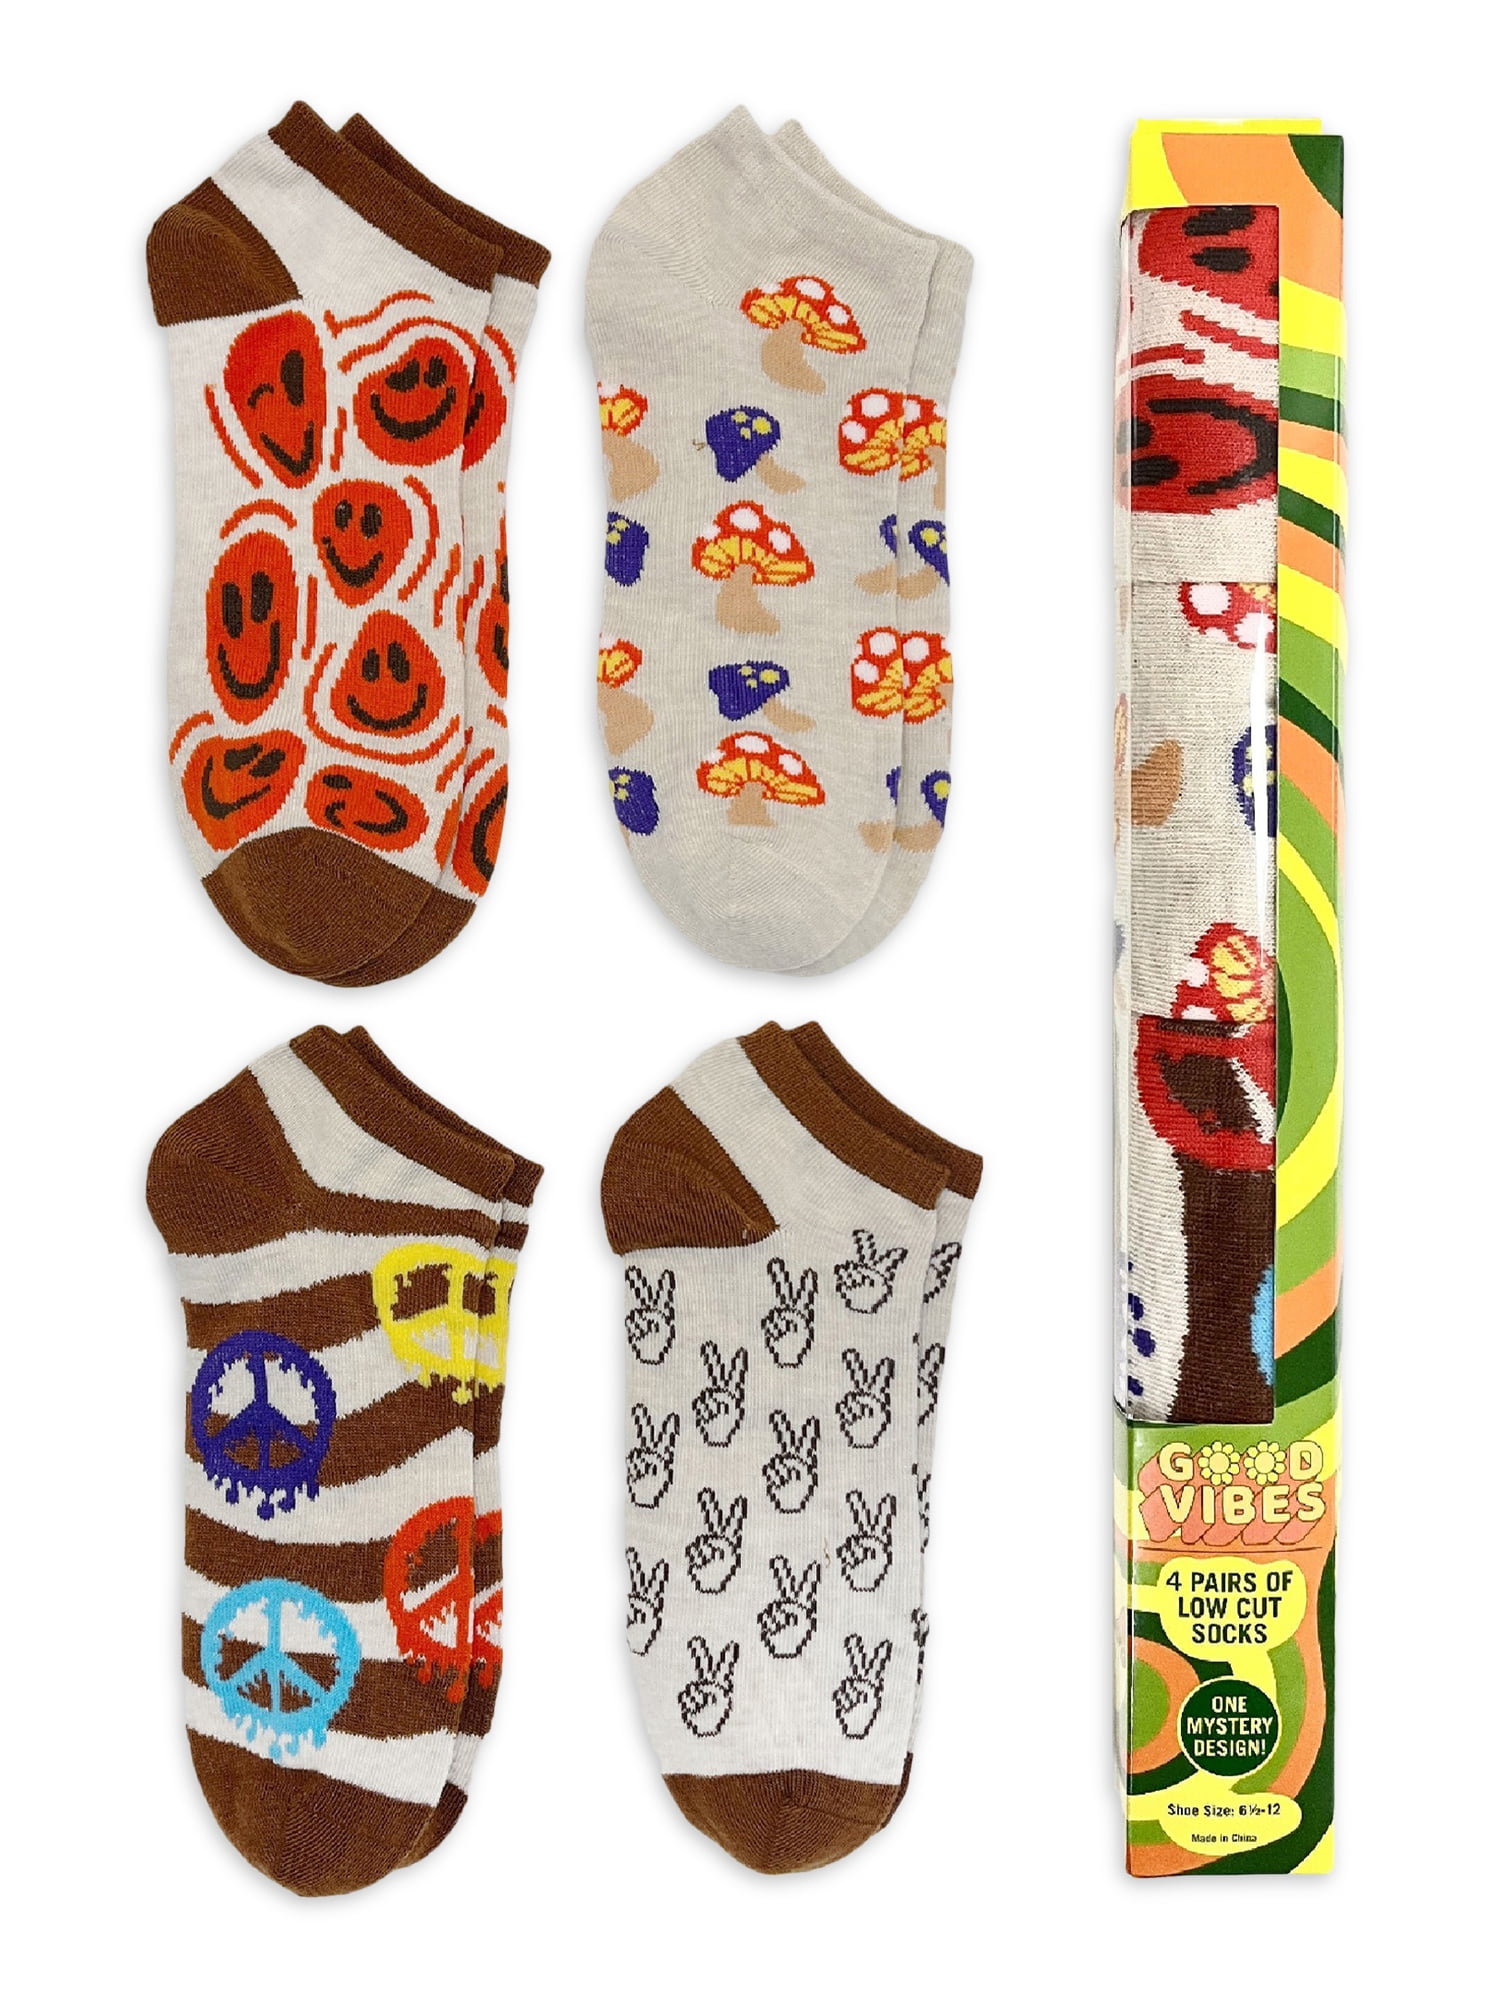 Men's Low Cut Socks, Fast Food Mystery Gift Box, 4-Pack, Size 6.5-12 